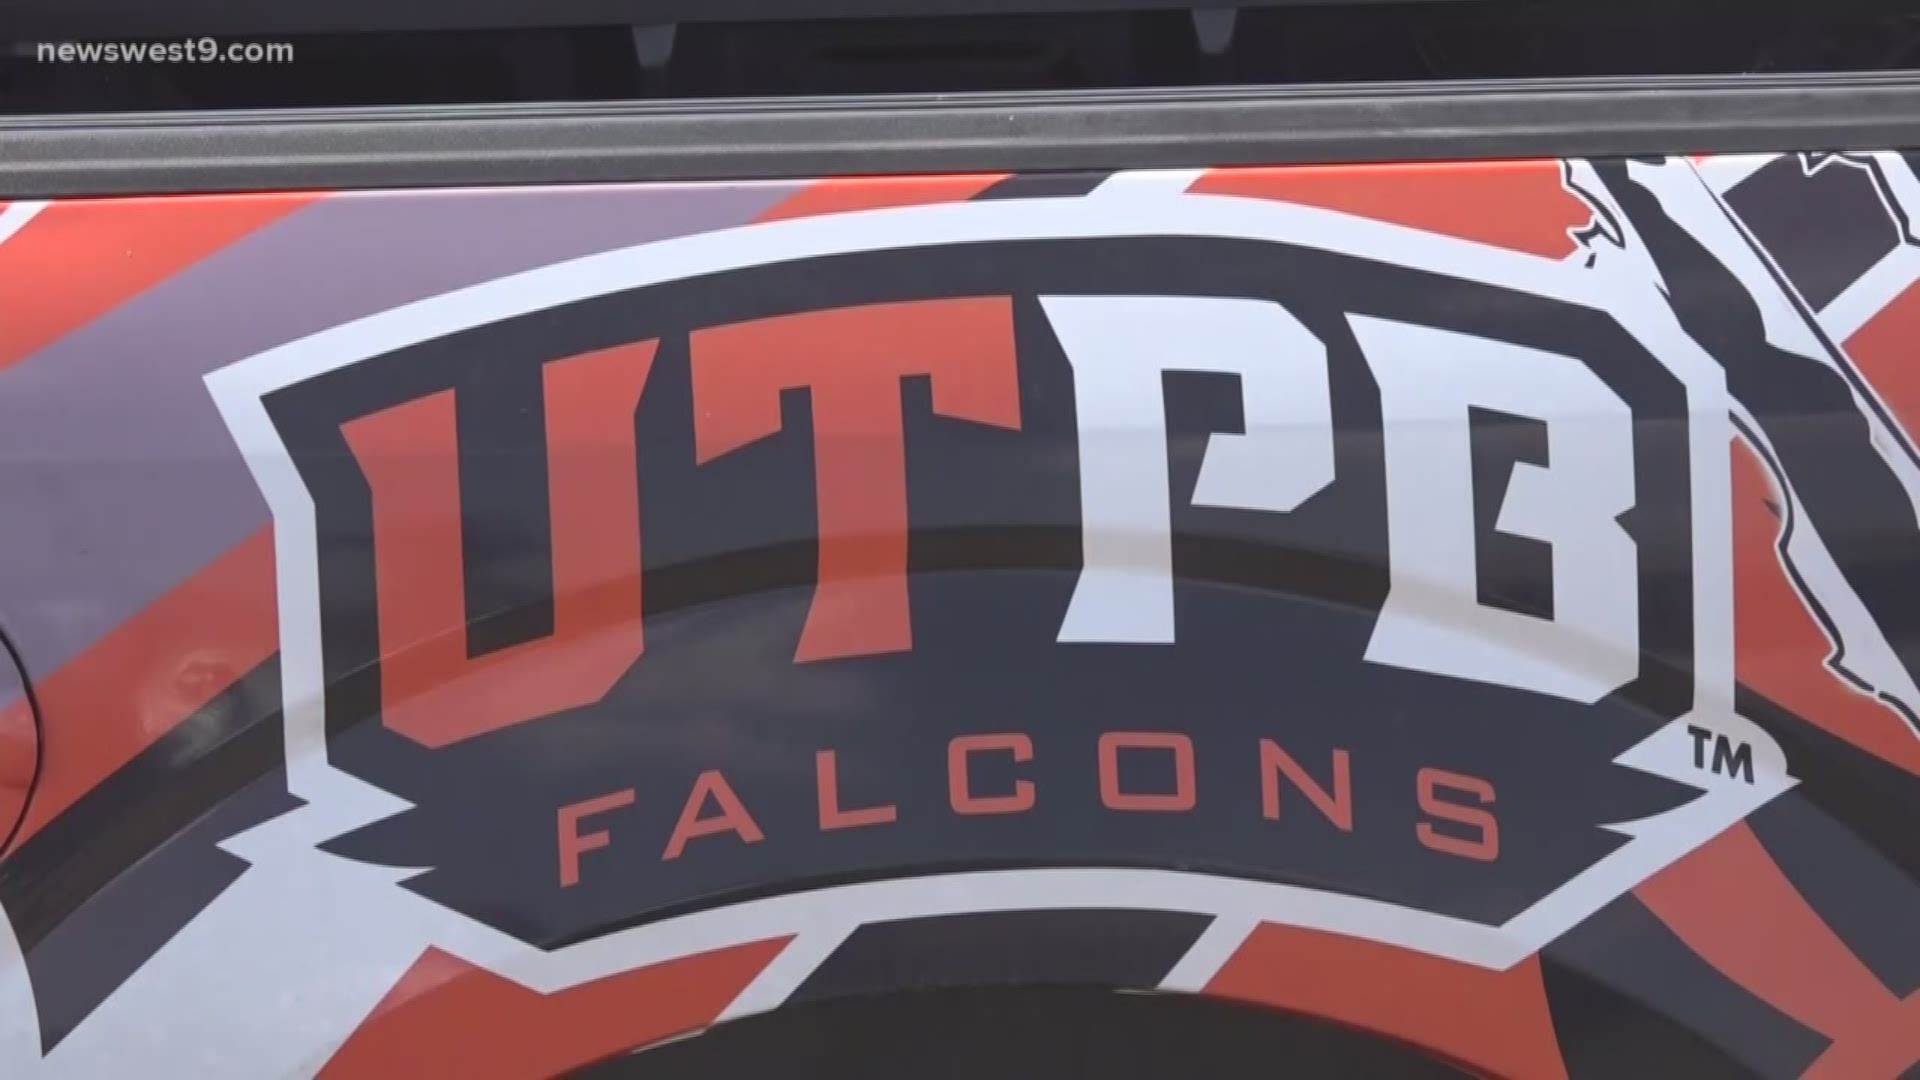 UTPB is trying to make sure that its international students have the opportunity to stay here and get their degree.